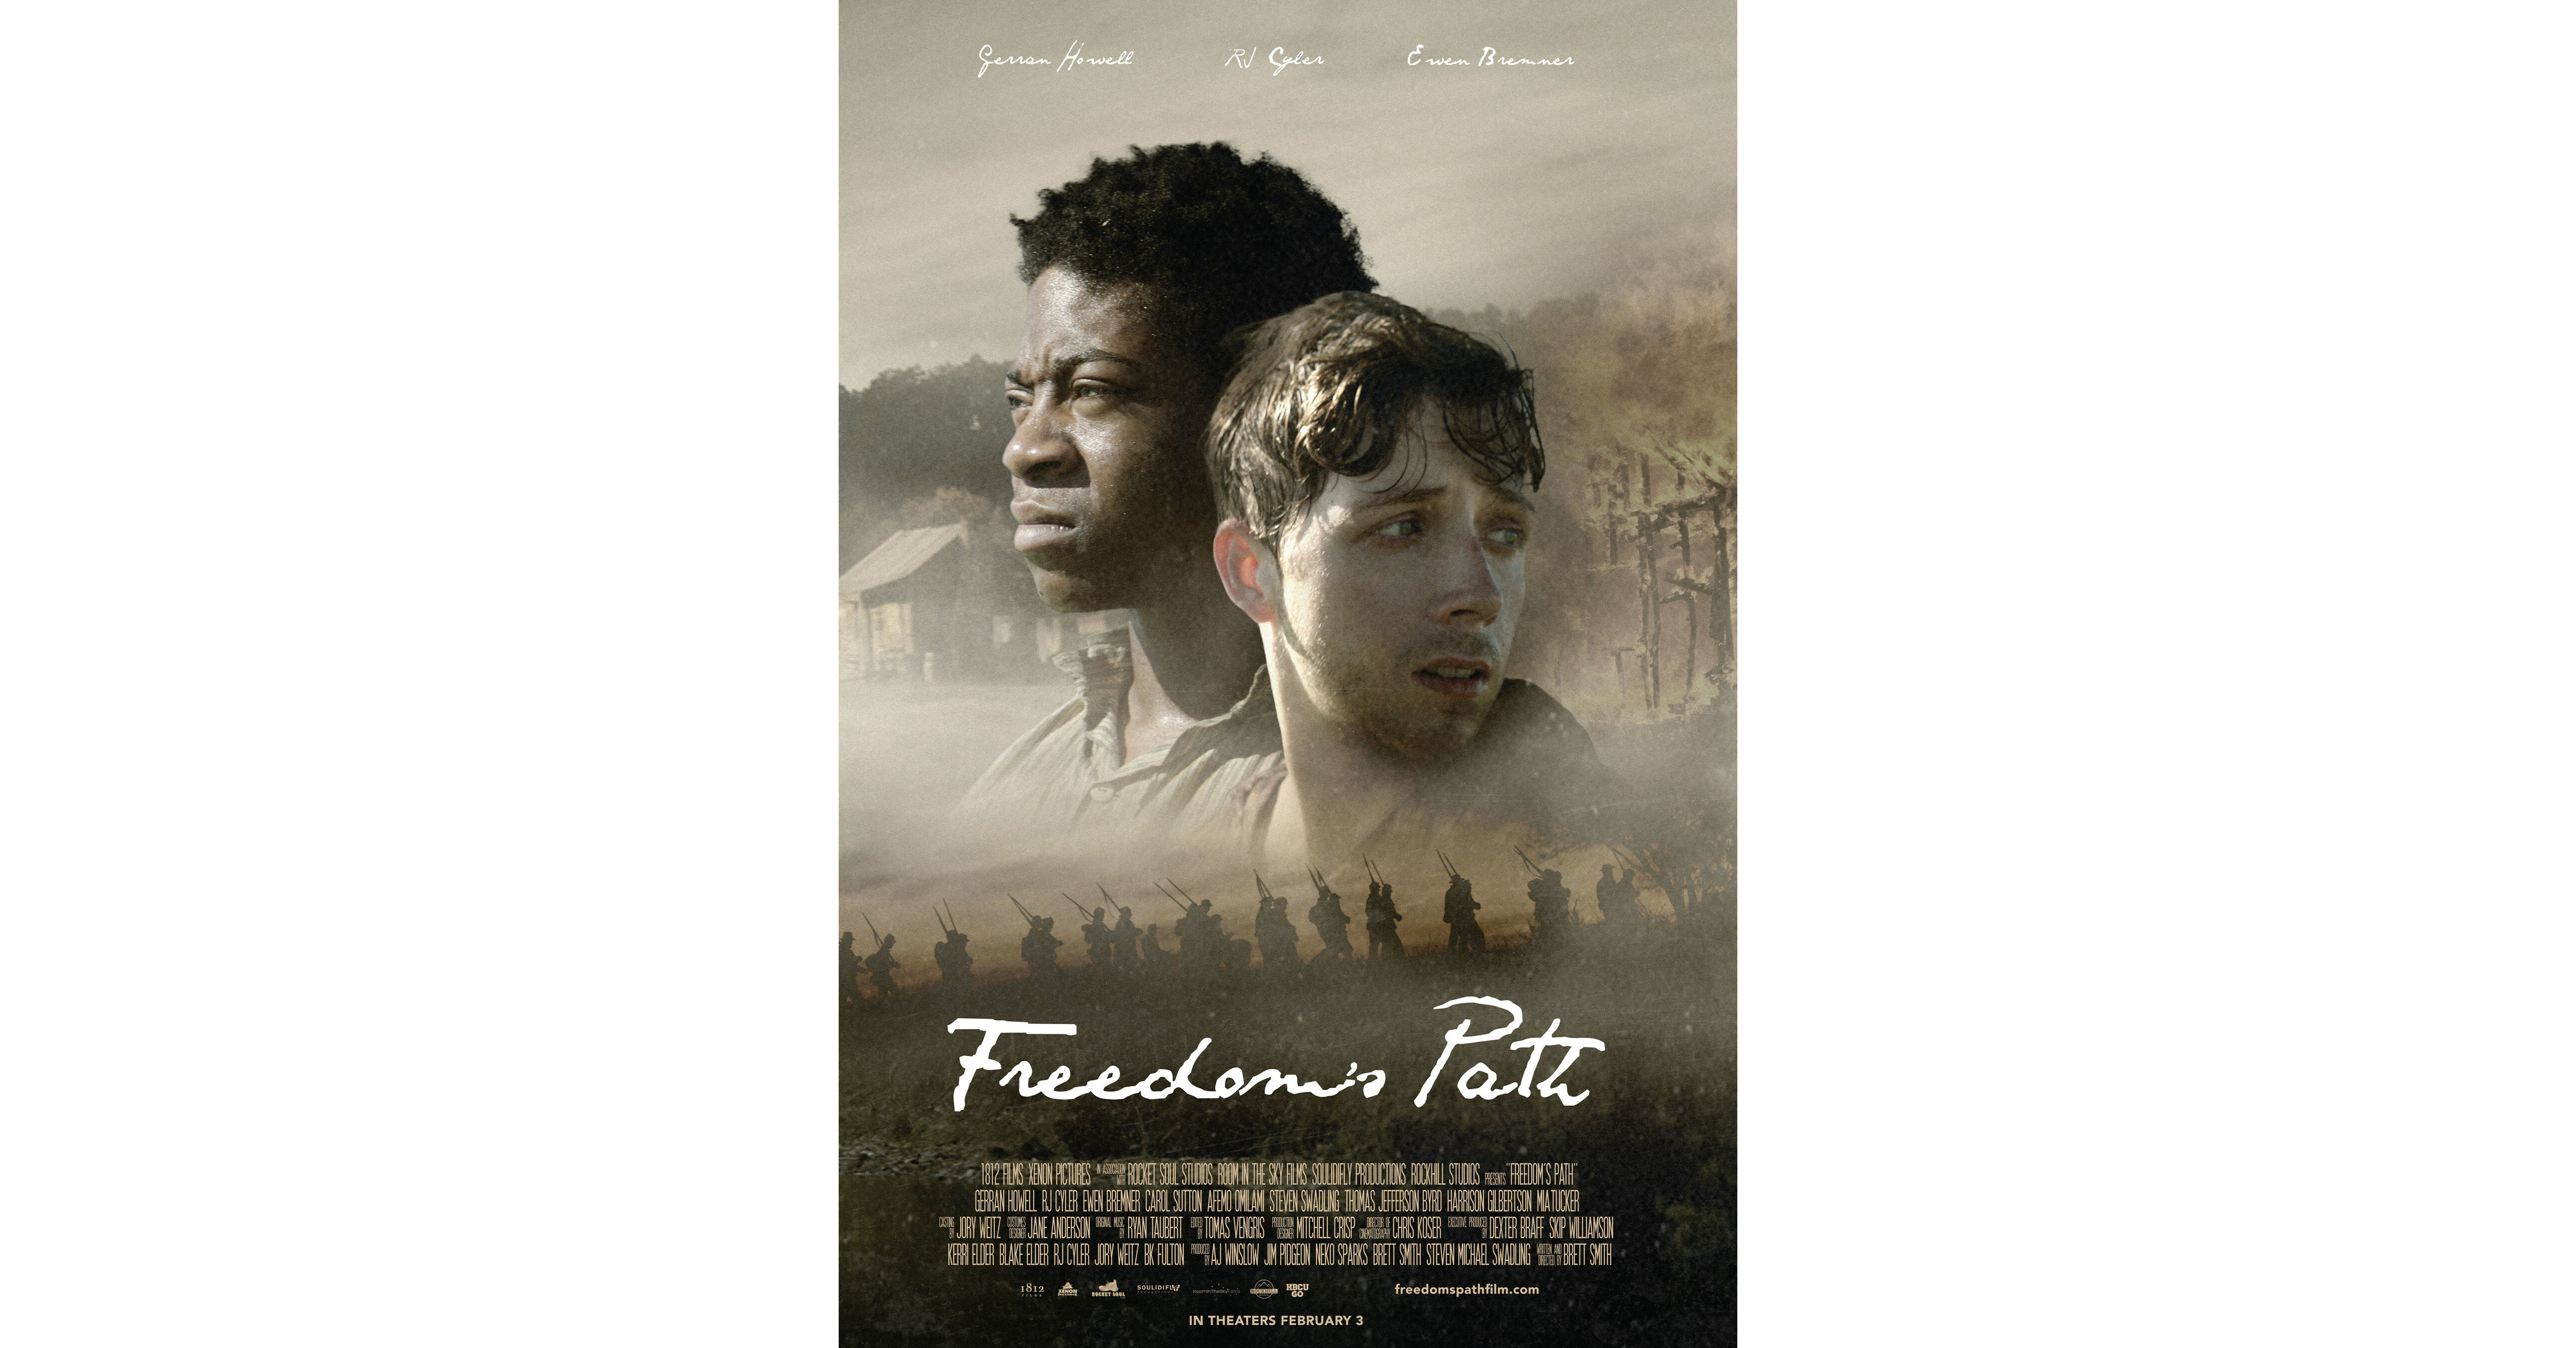 Award Winning “Freedom’s Path” Opens Nationwide Friday, February 3; Commemorating Black History Month through Xenon Pictures